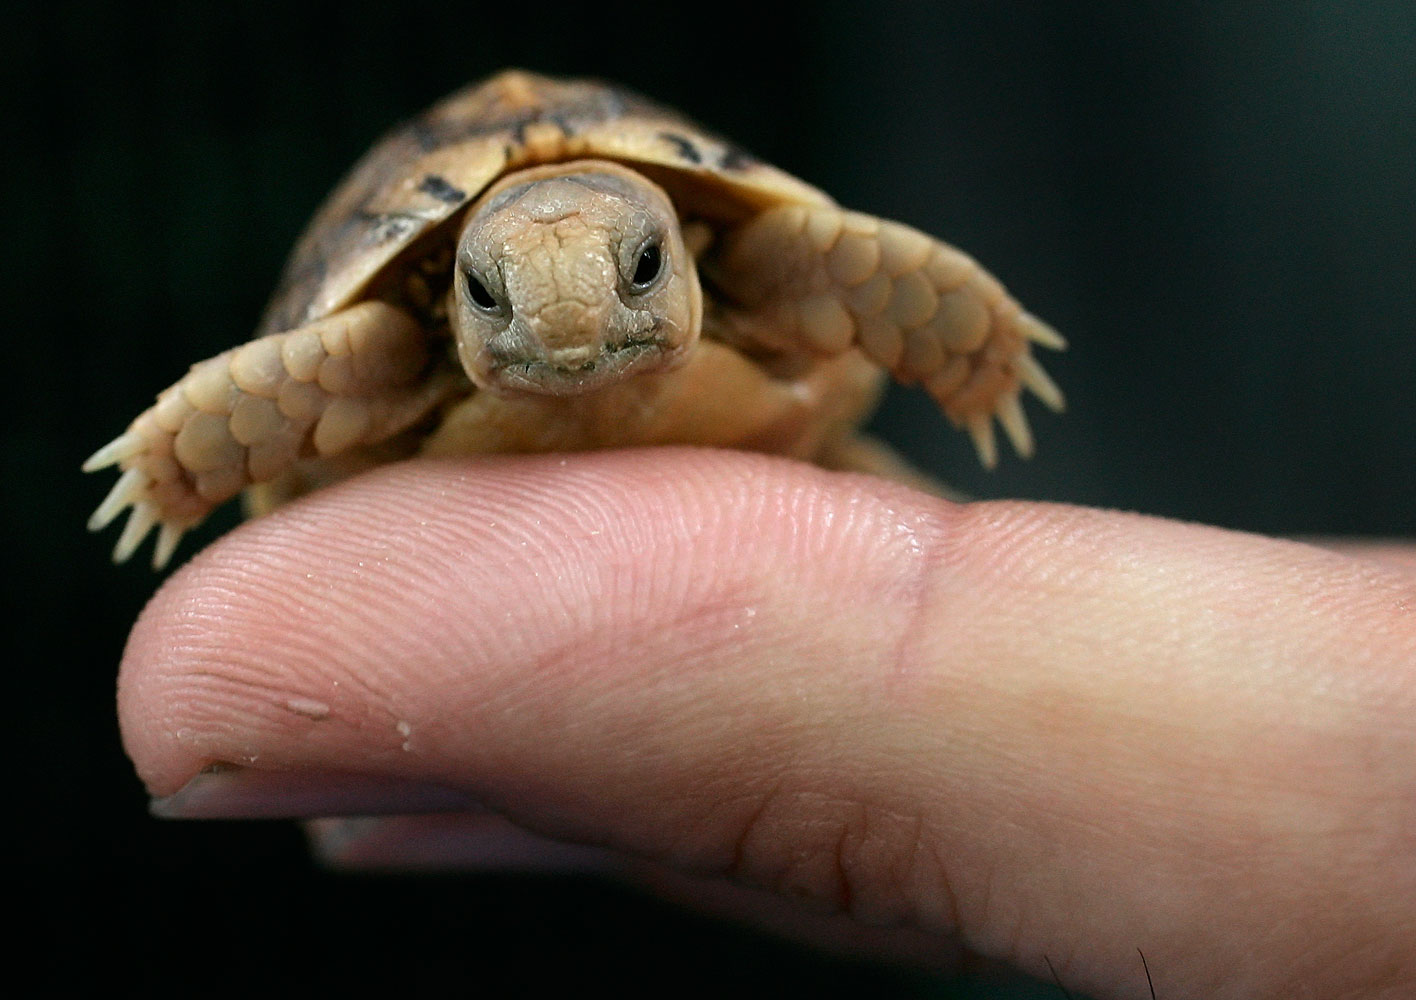 Worker from Rome's Biopark zoo holds a Testudo Kleinmanni hatchling in Rome